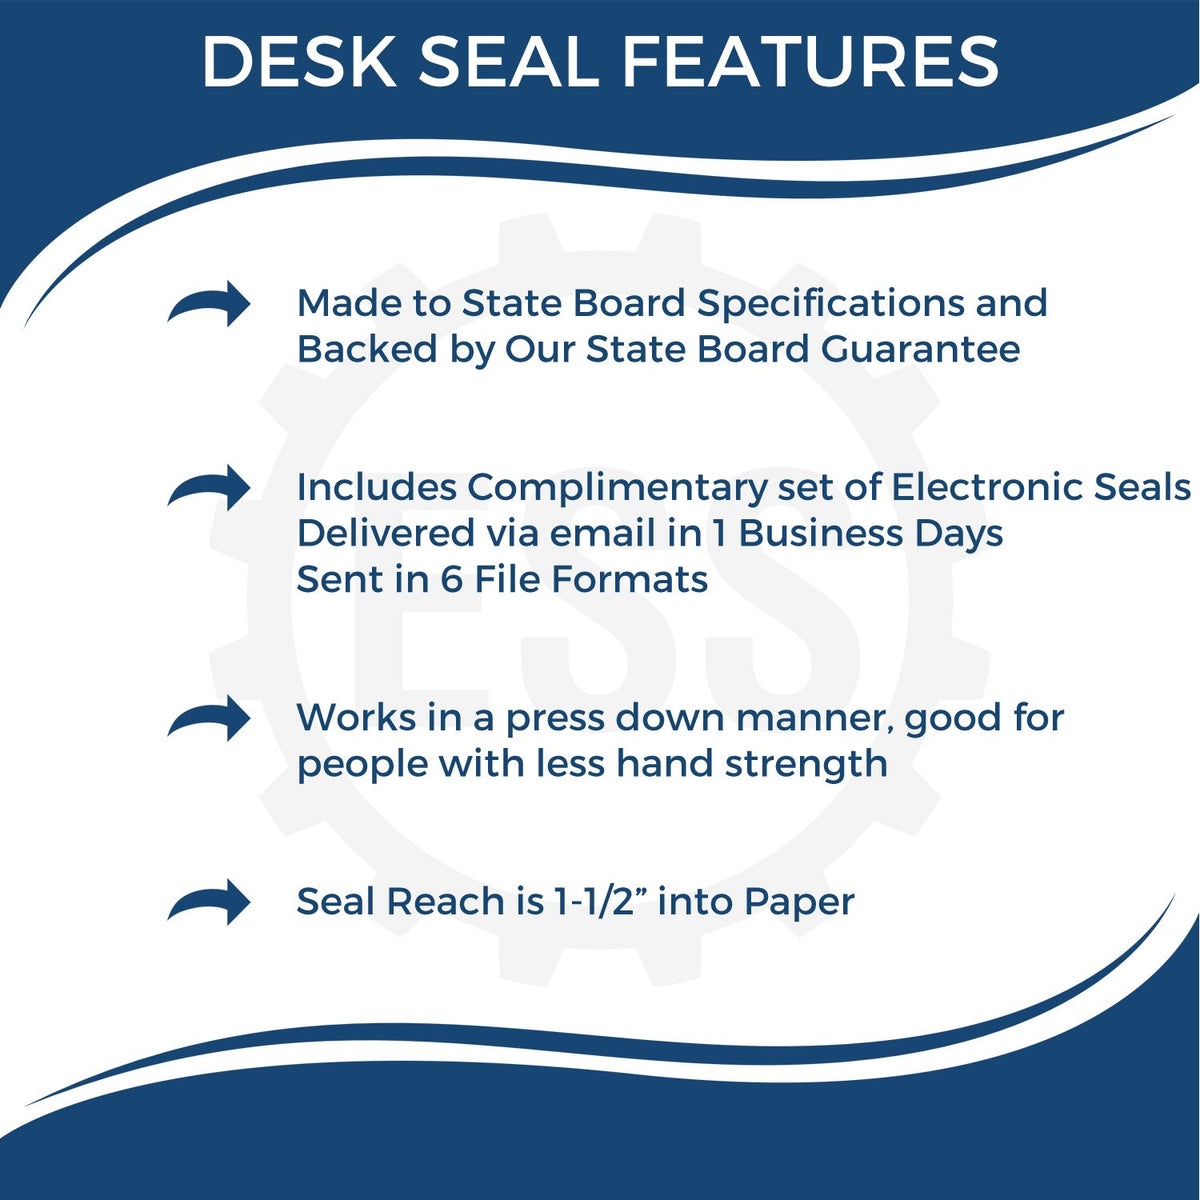 A picture of an infographic highlighting the selling points for the Vermont Engineer Desk Seal